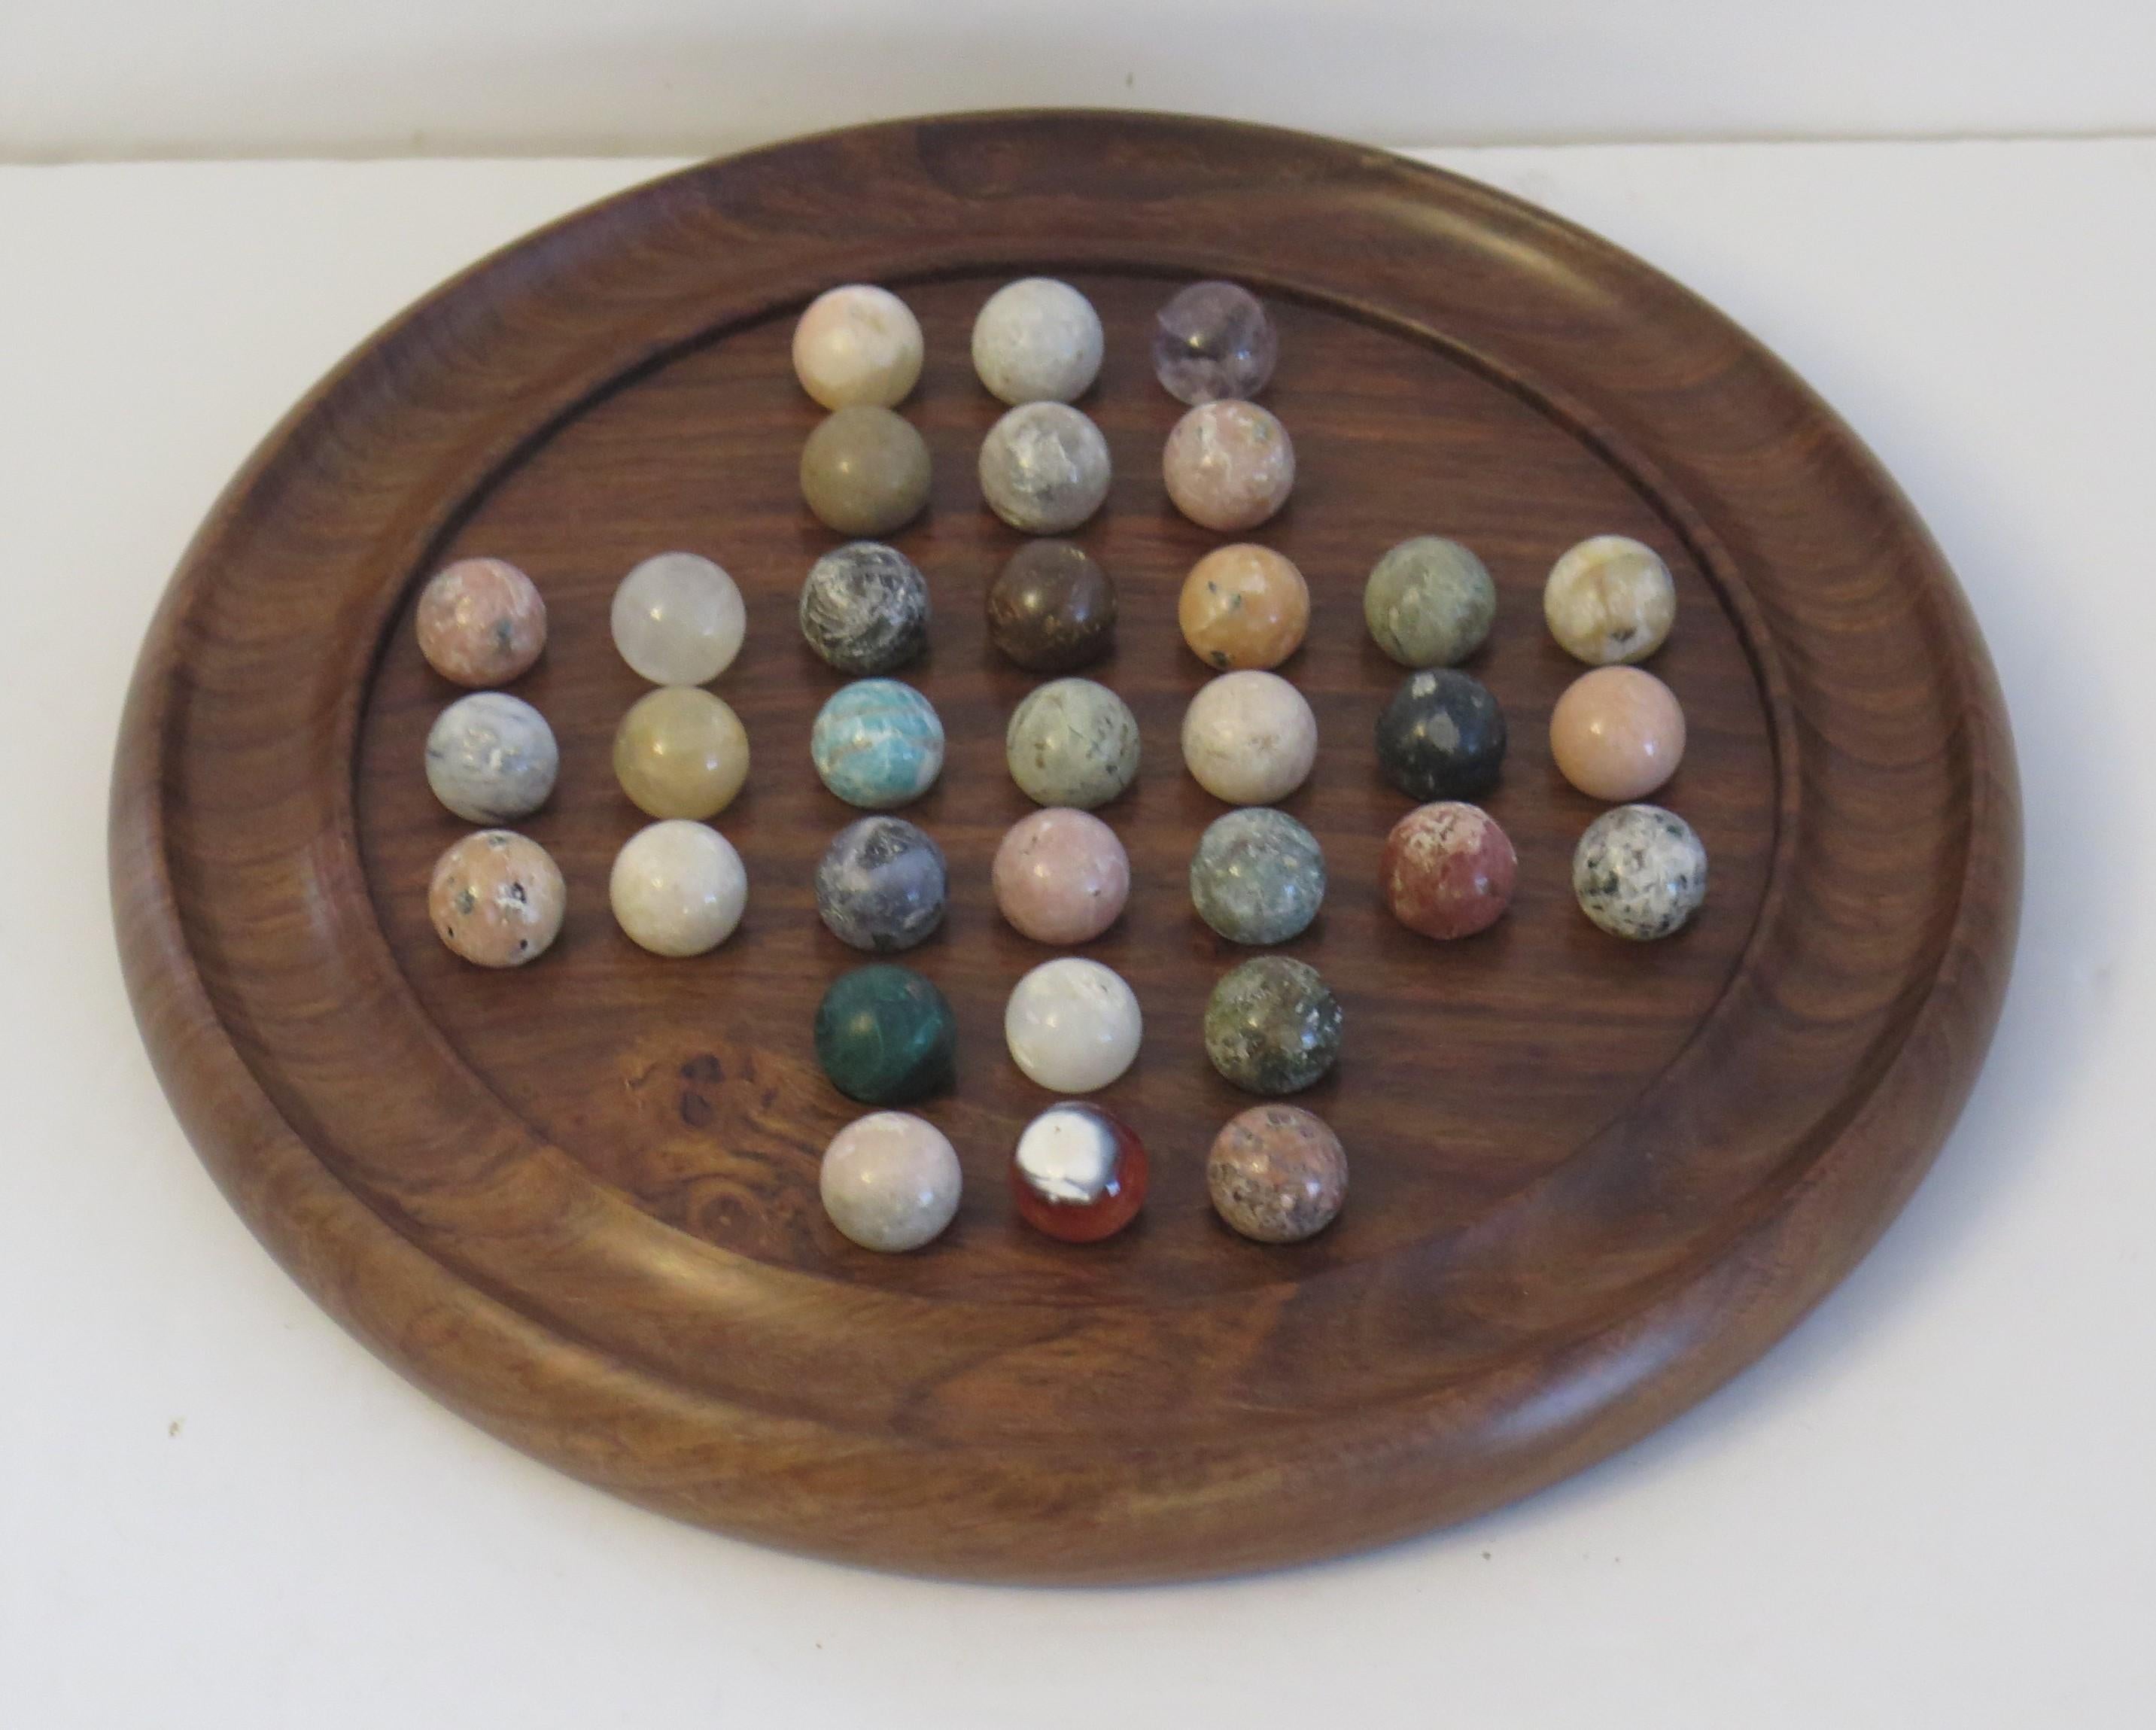 This is a very attractive complete game of Marble Solitaire with a hand turned hardwood board and 33 beautiful agate mineral stone marbles, probably French and all dating to the first half of the 20th century, circa 1930s.

The circular hand